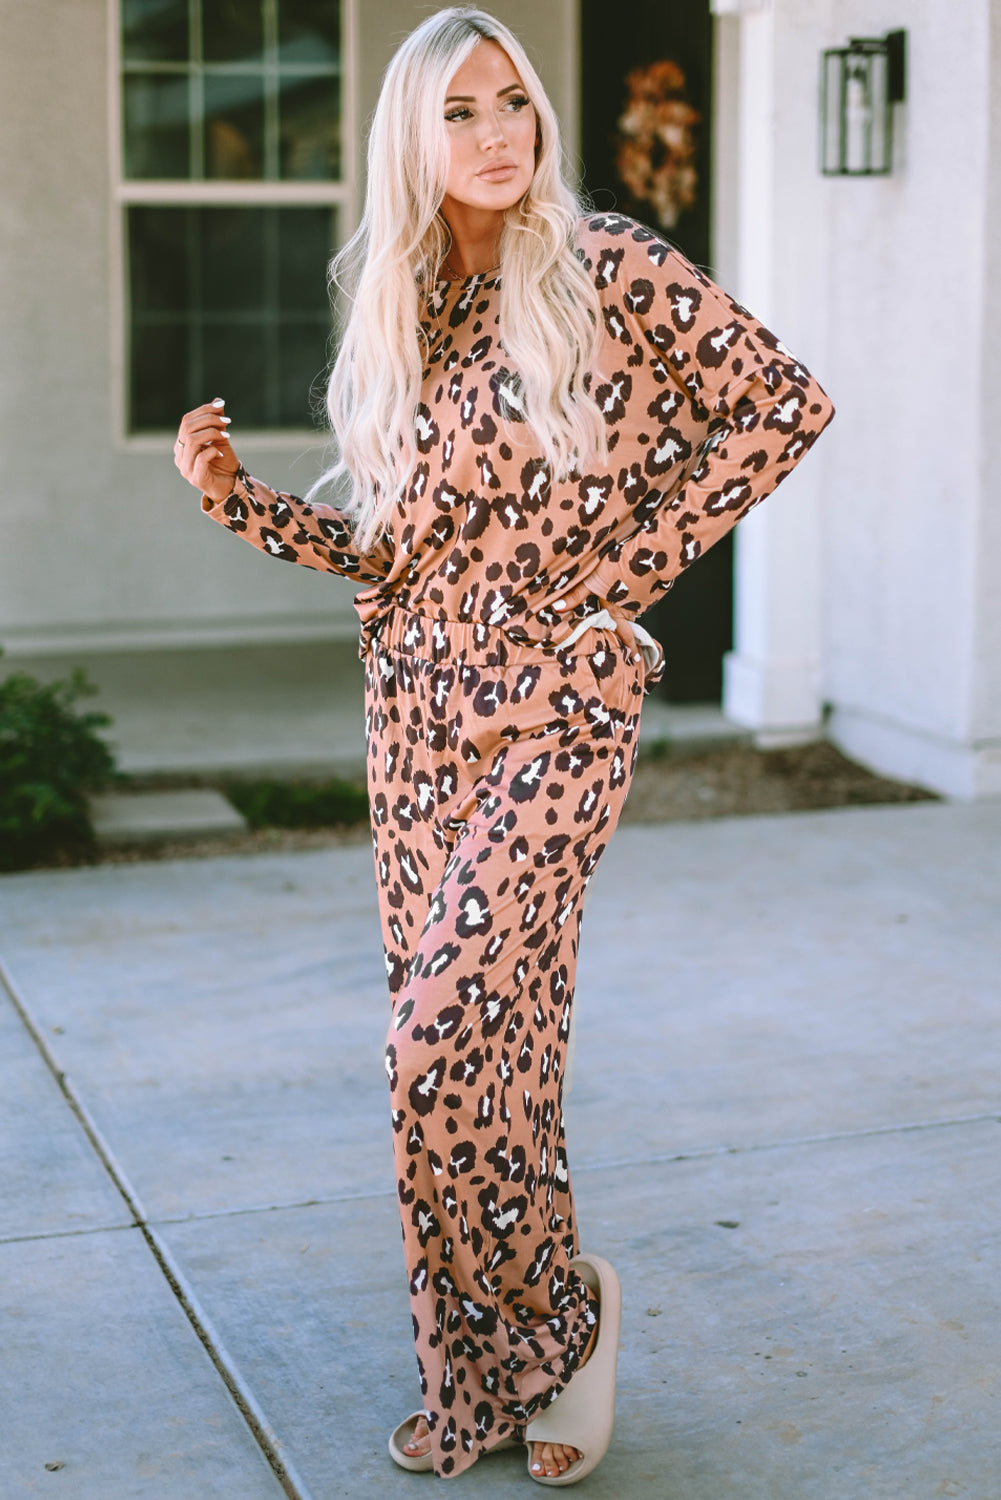 Brown Leopard Print Long Sleeve Pullover and Pants Outfit